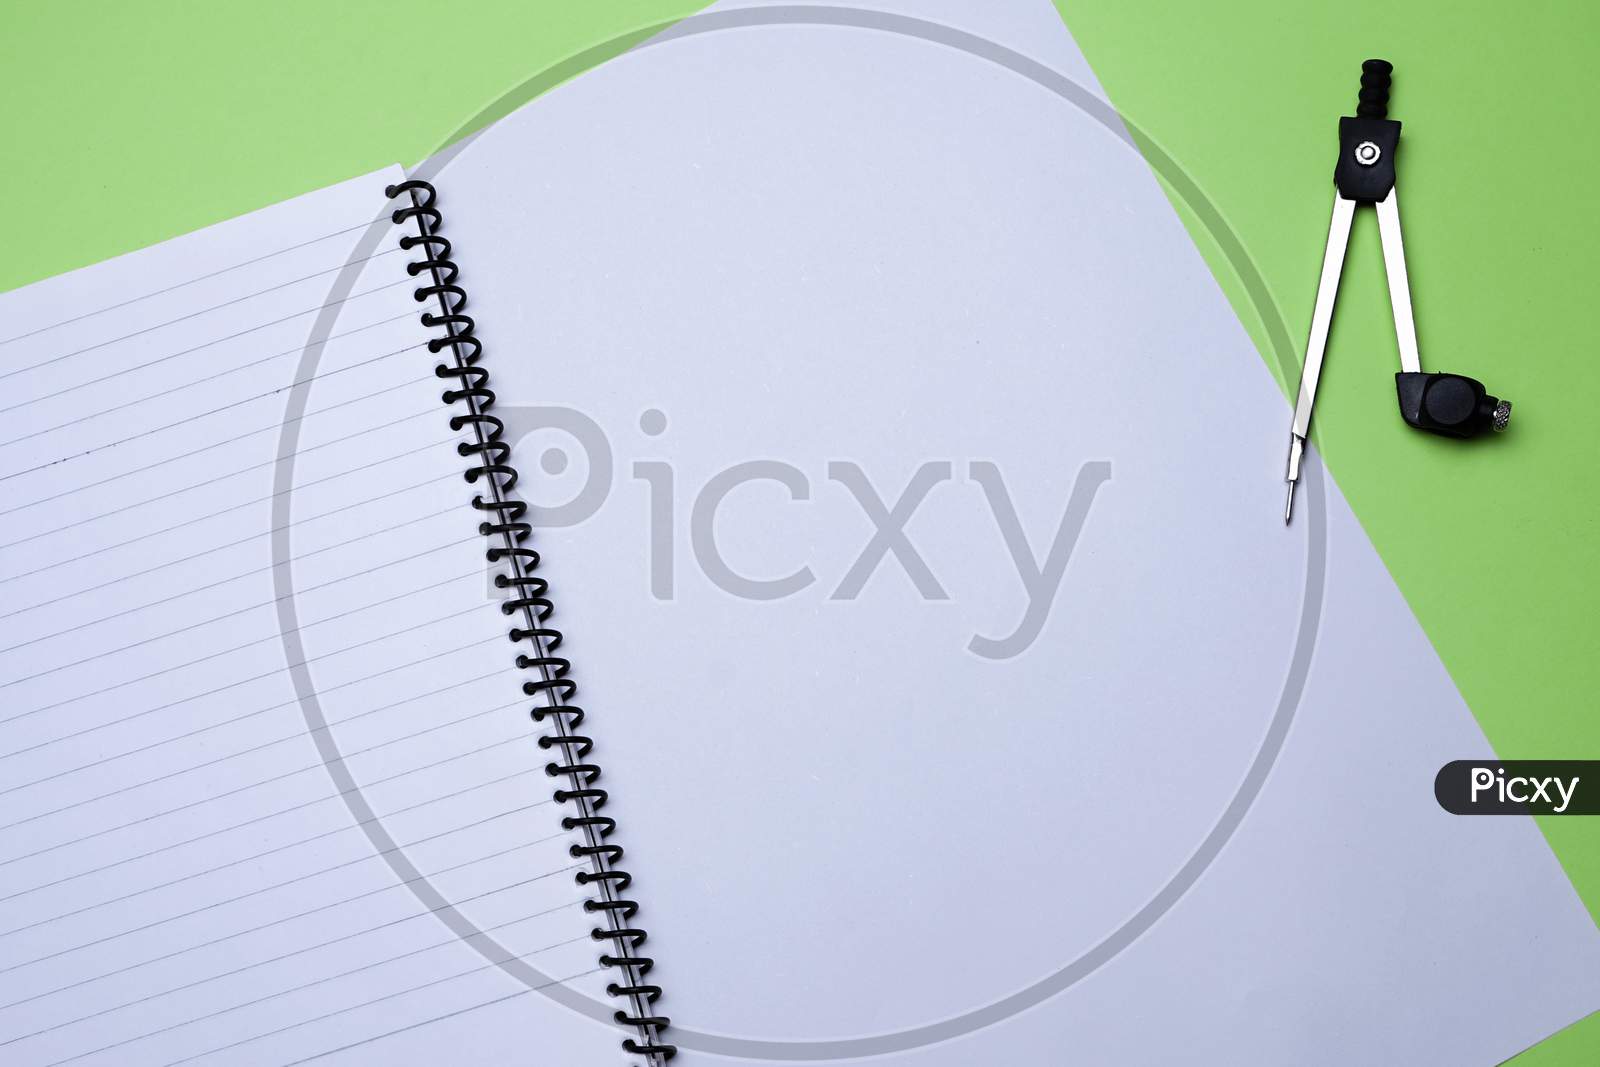 Creative Flat Lay, Table Top, Overview For Students Homework, Education, Office And Business.Spiral Notebook, White Sheet And Compass On Green Background